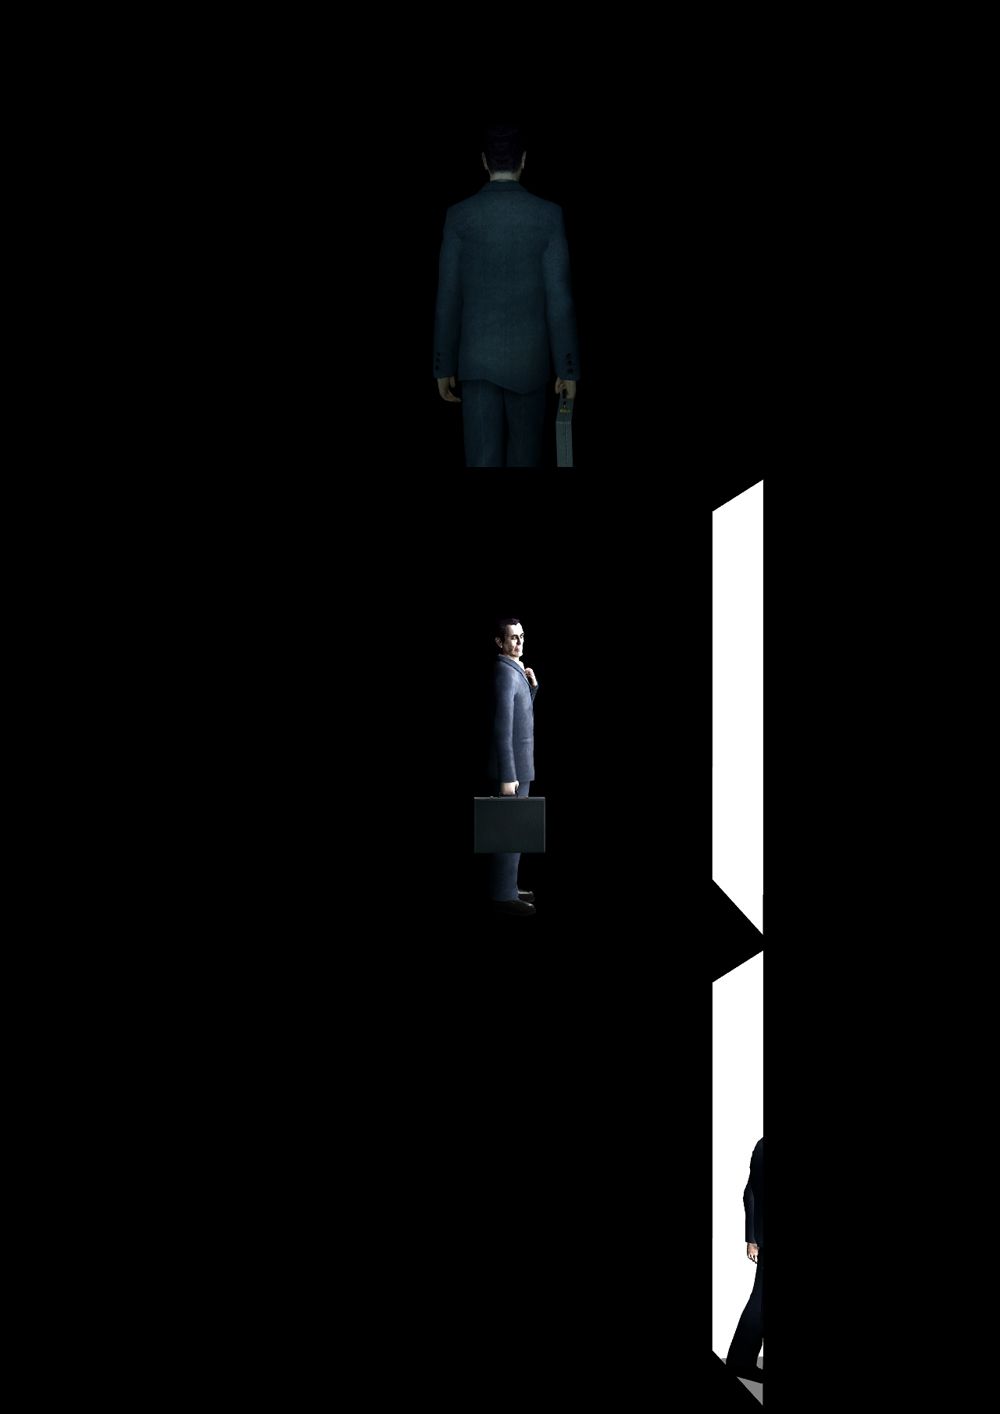 The G-Man turns to leave and walks away a few steps, then turns to the right. A white door appears out of nowhere. The G-Man fixes his tie once as he stares back at Alyx, then walks through the door.